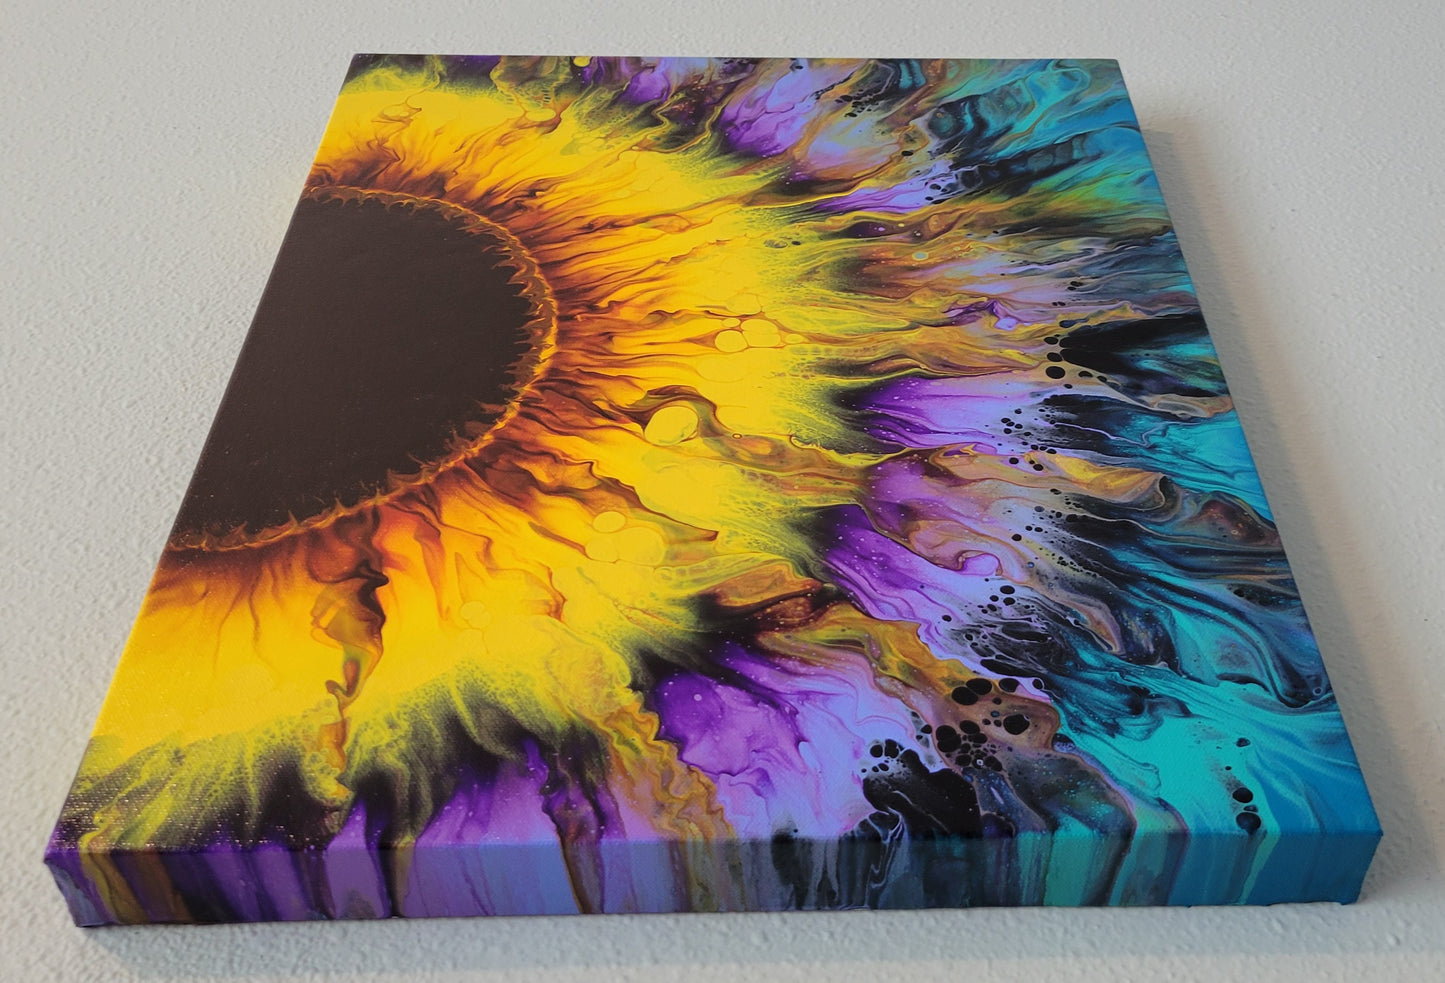 Original Sunflower Painting 16x20 inch Gallery Wrapped Deep Edge Canvas